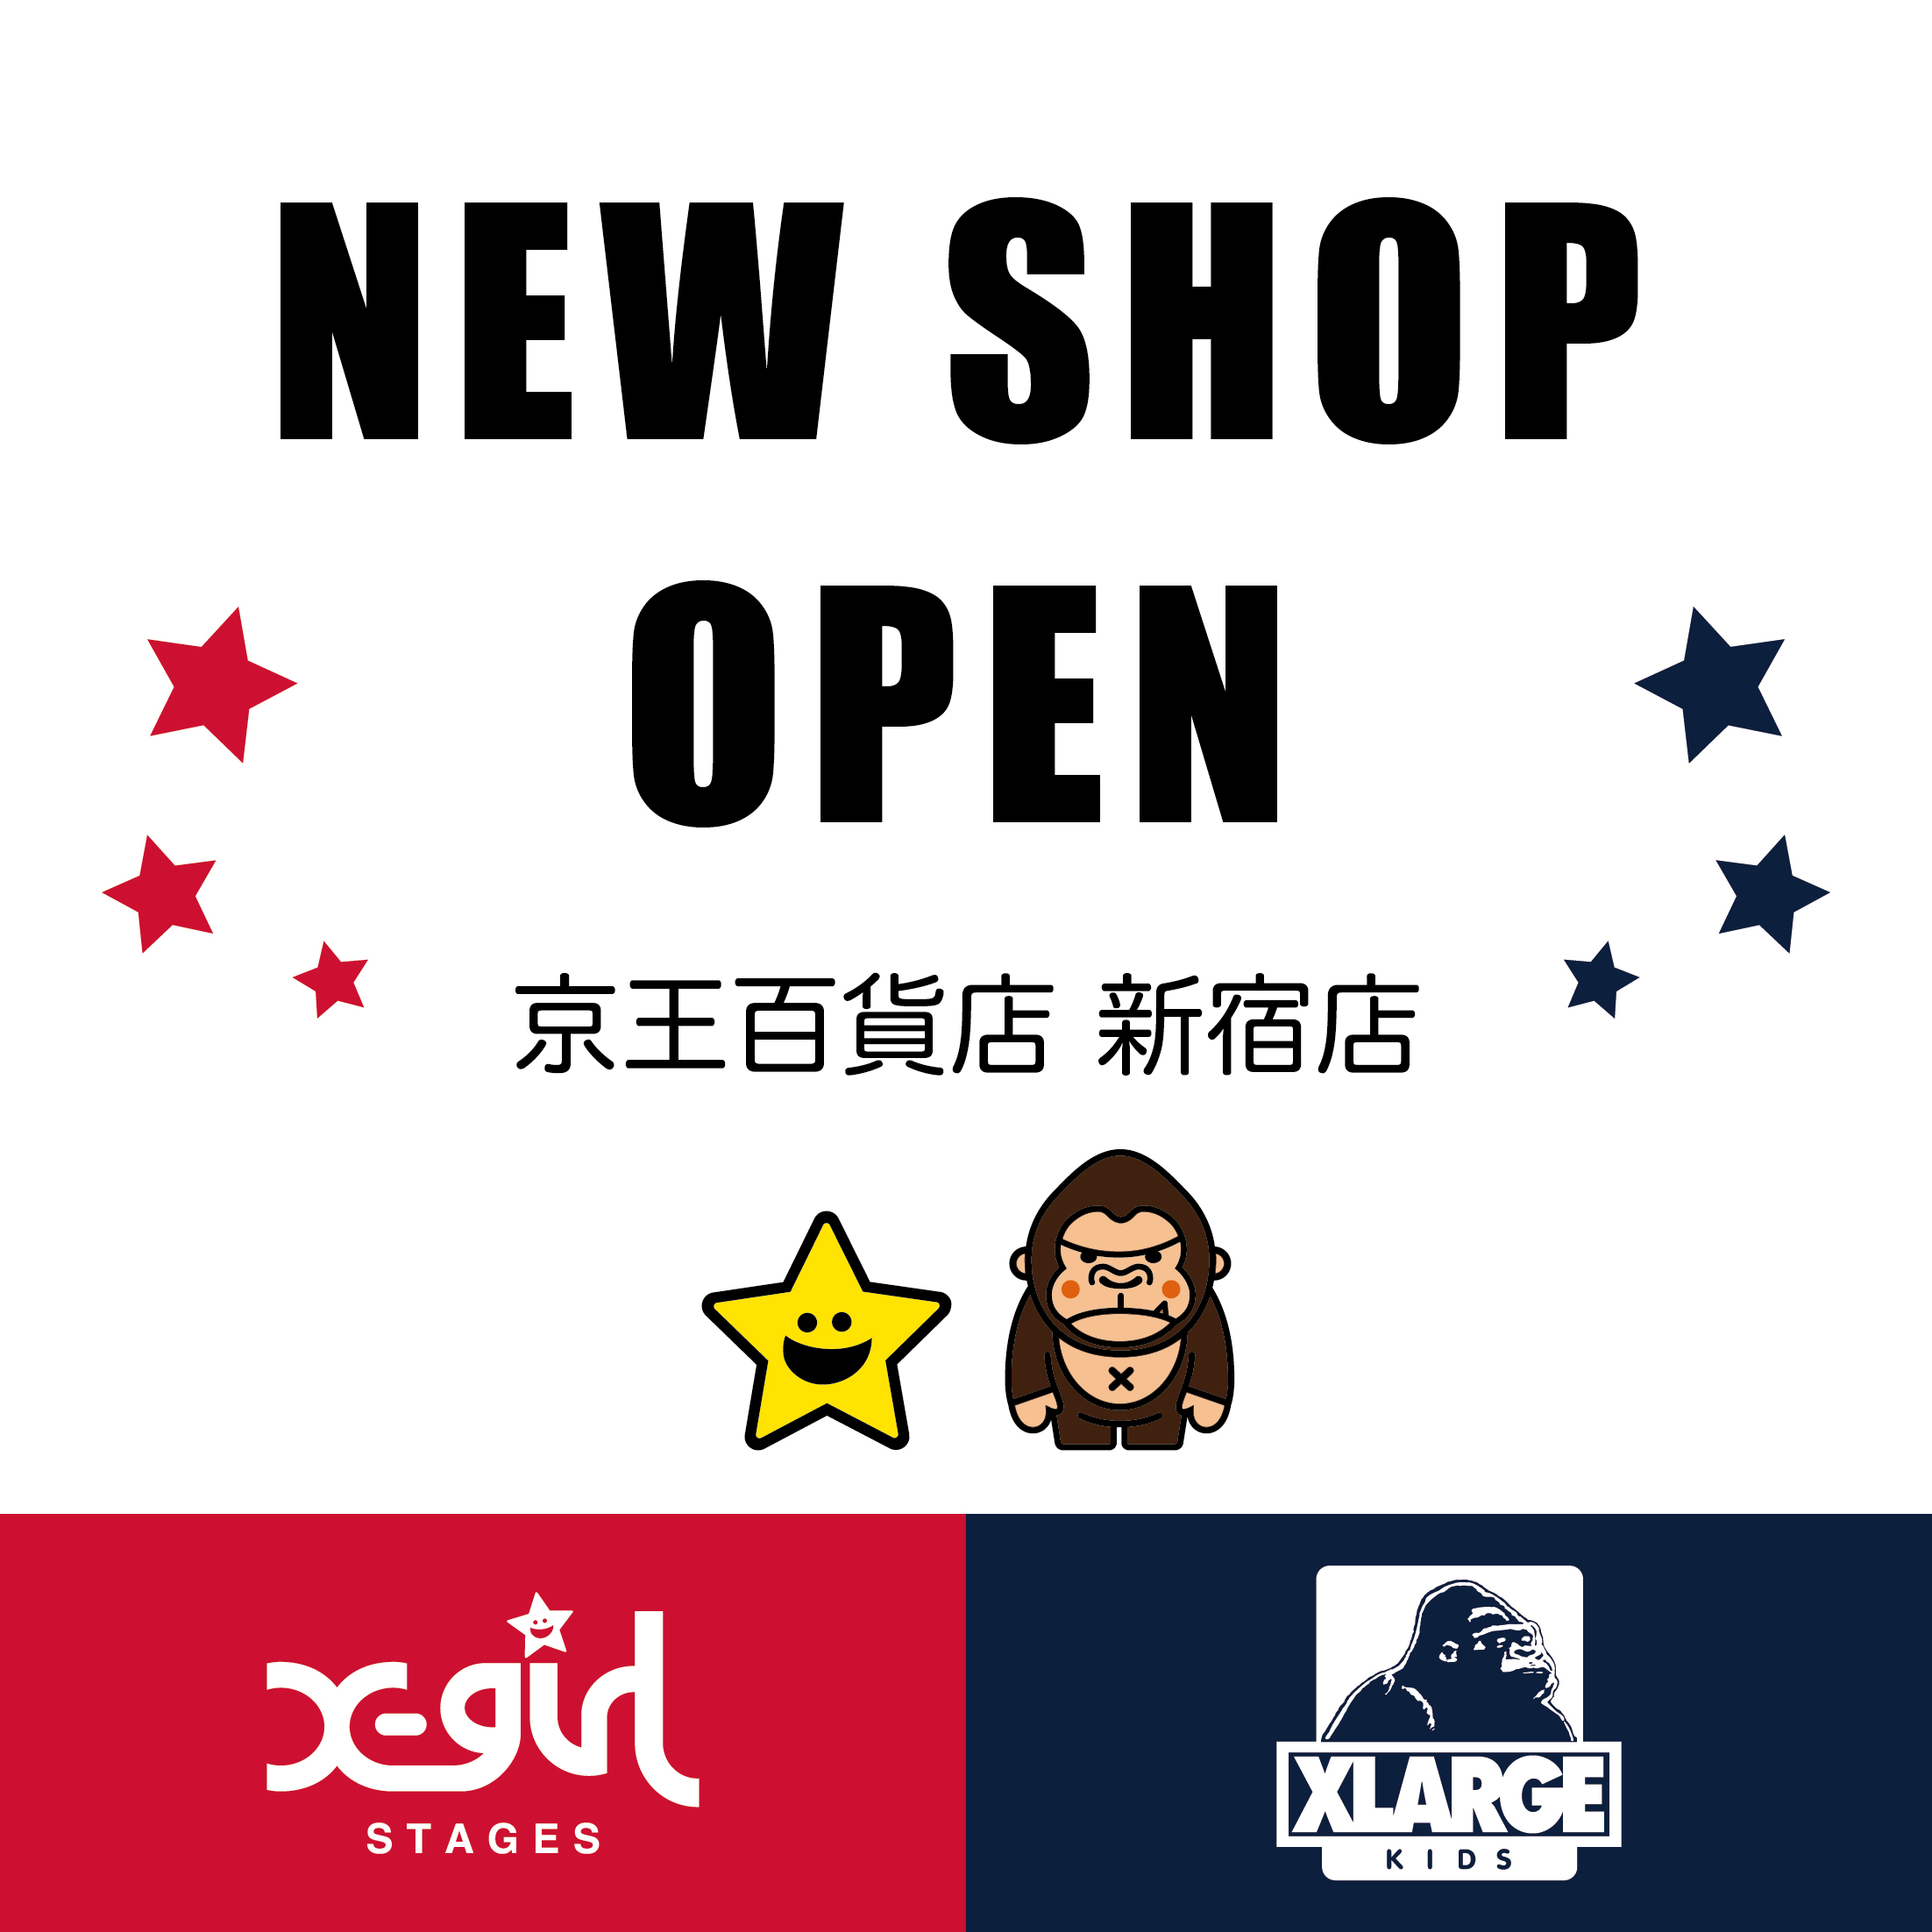 【NEW SHOP OPEN】3/7(木)京王百貨店新宿店X-girl StagesのNEW SHOPがOPEN致します。